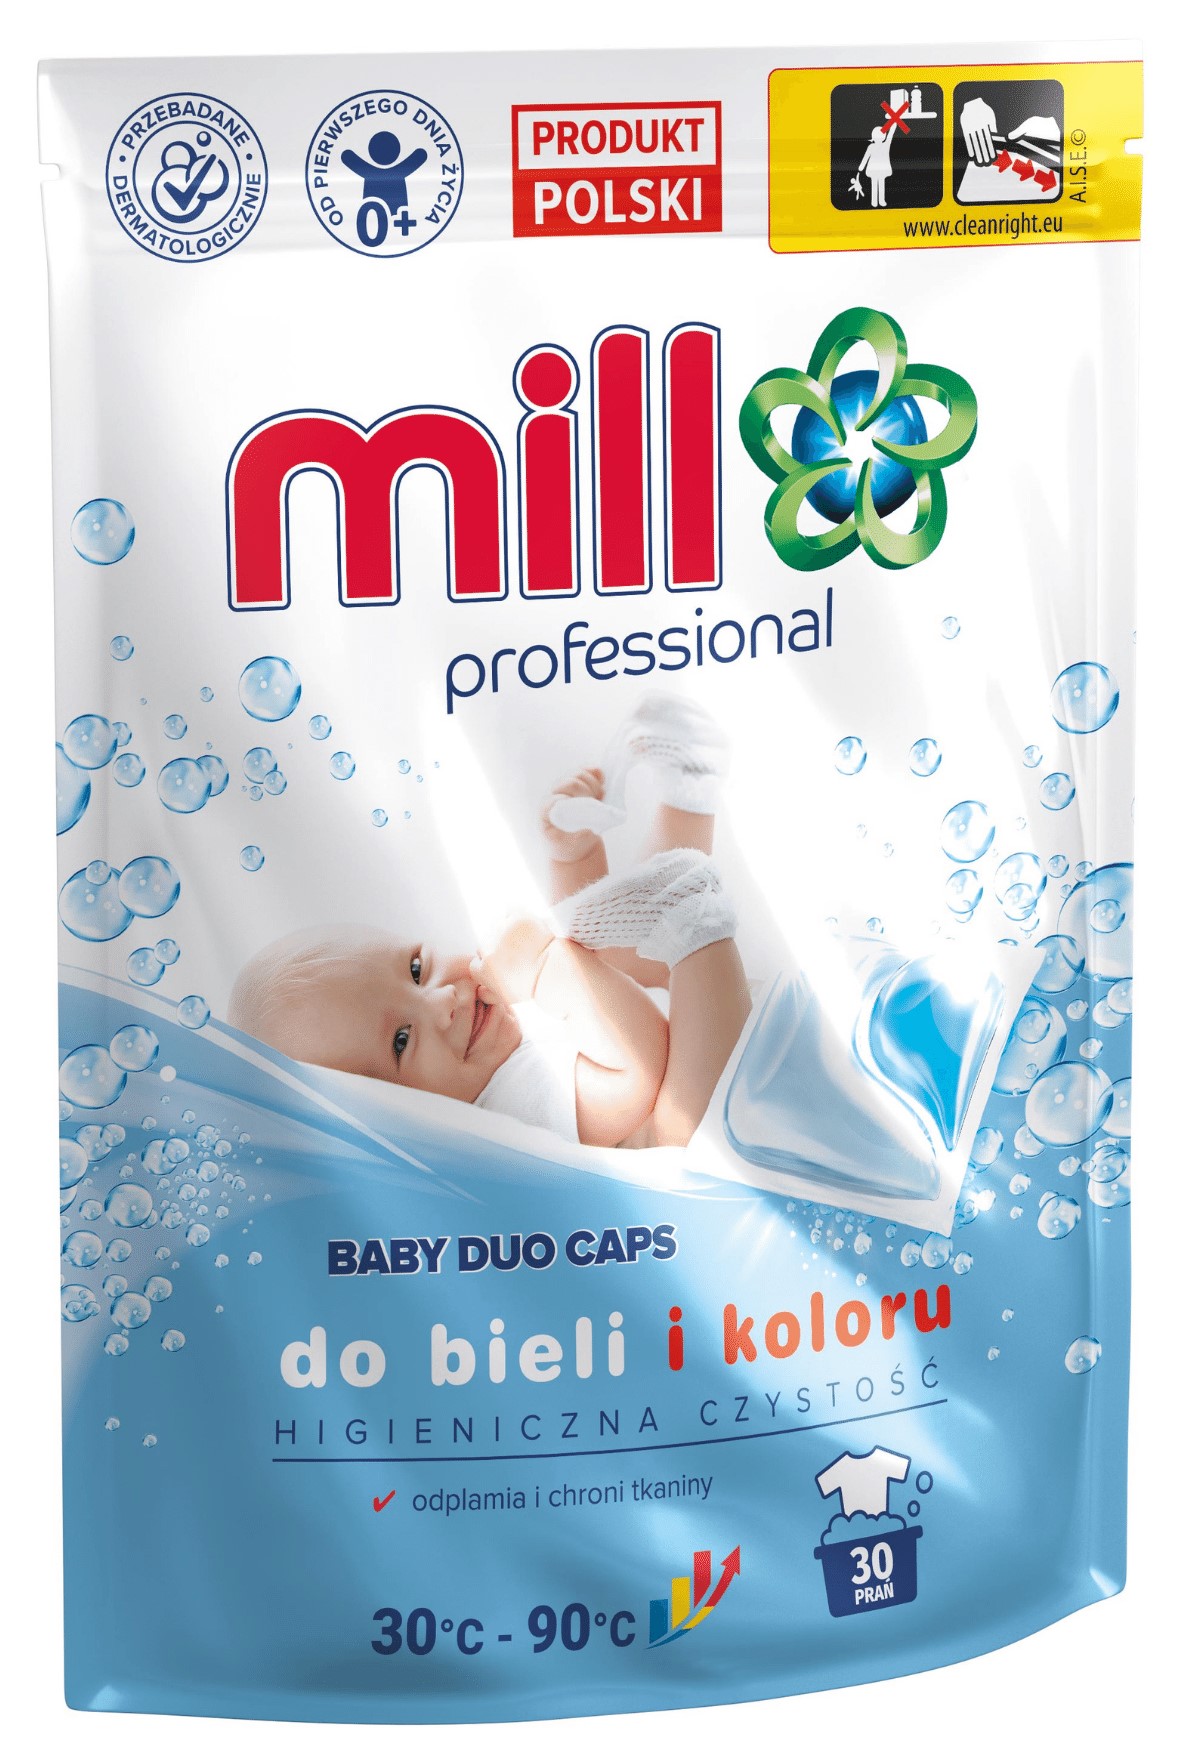 Mill Baby Capsules for washing white and colored fabrics